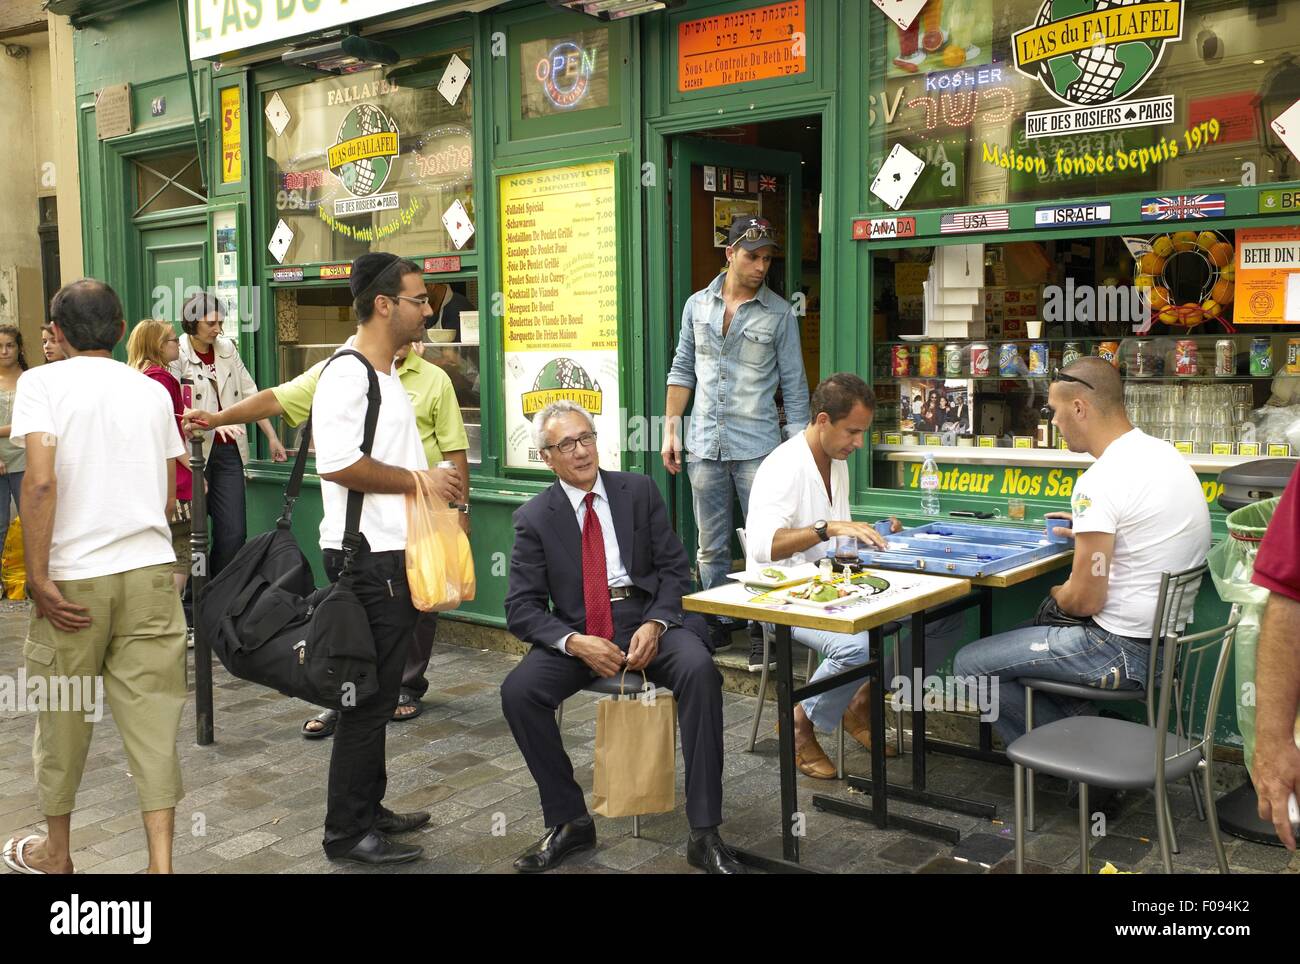 People sitting on chairs in front of restaurant in Marais, Paris, France Stock Photo